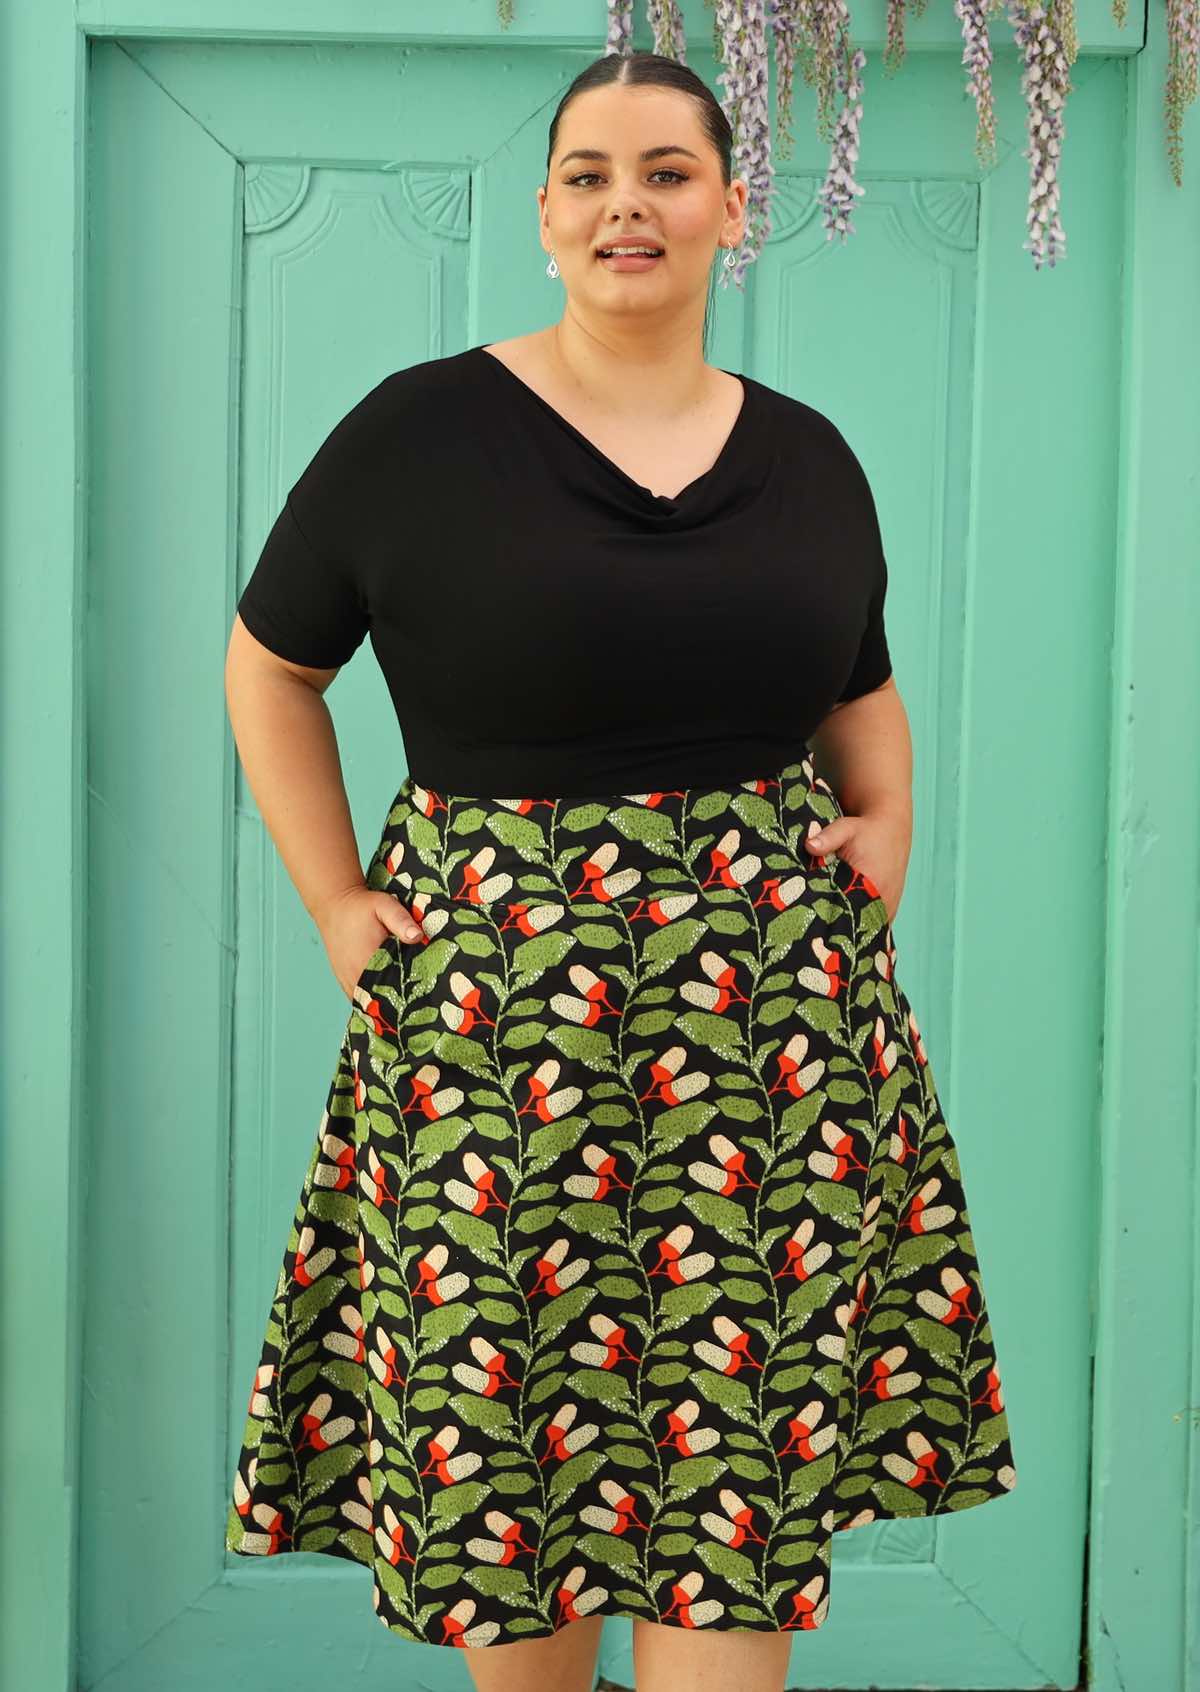 Plus size model wearing black retro style cotton skirt with wide waist band and pockets